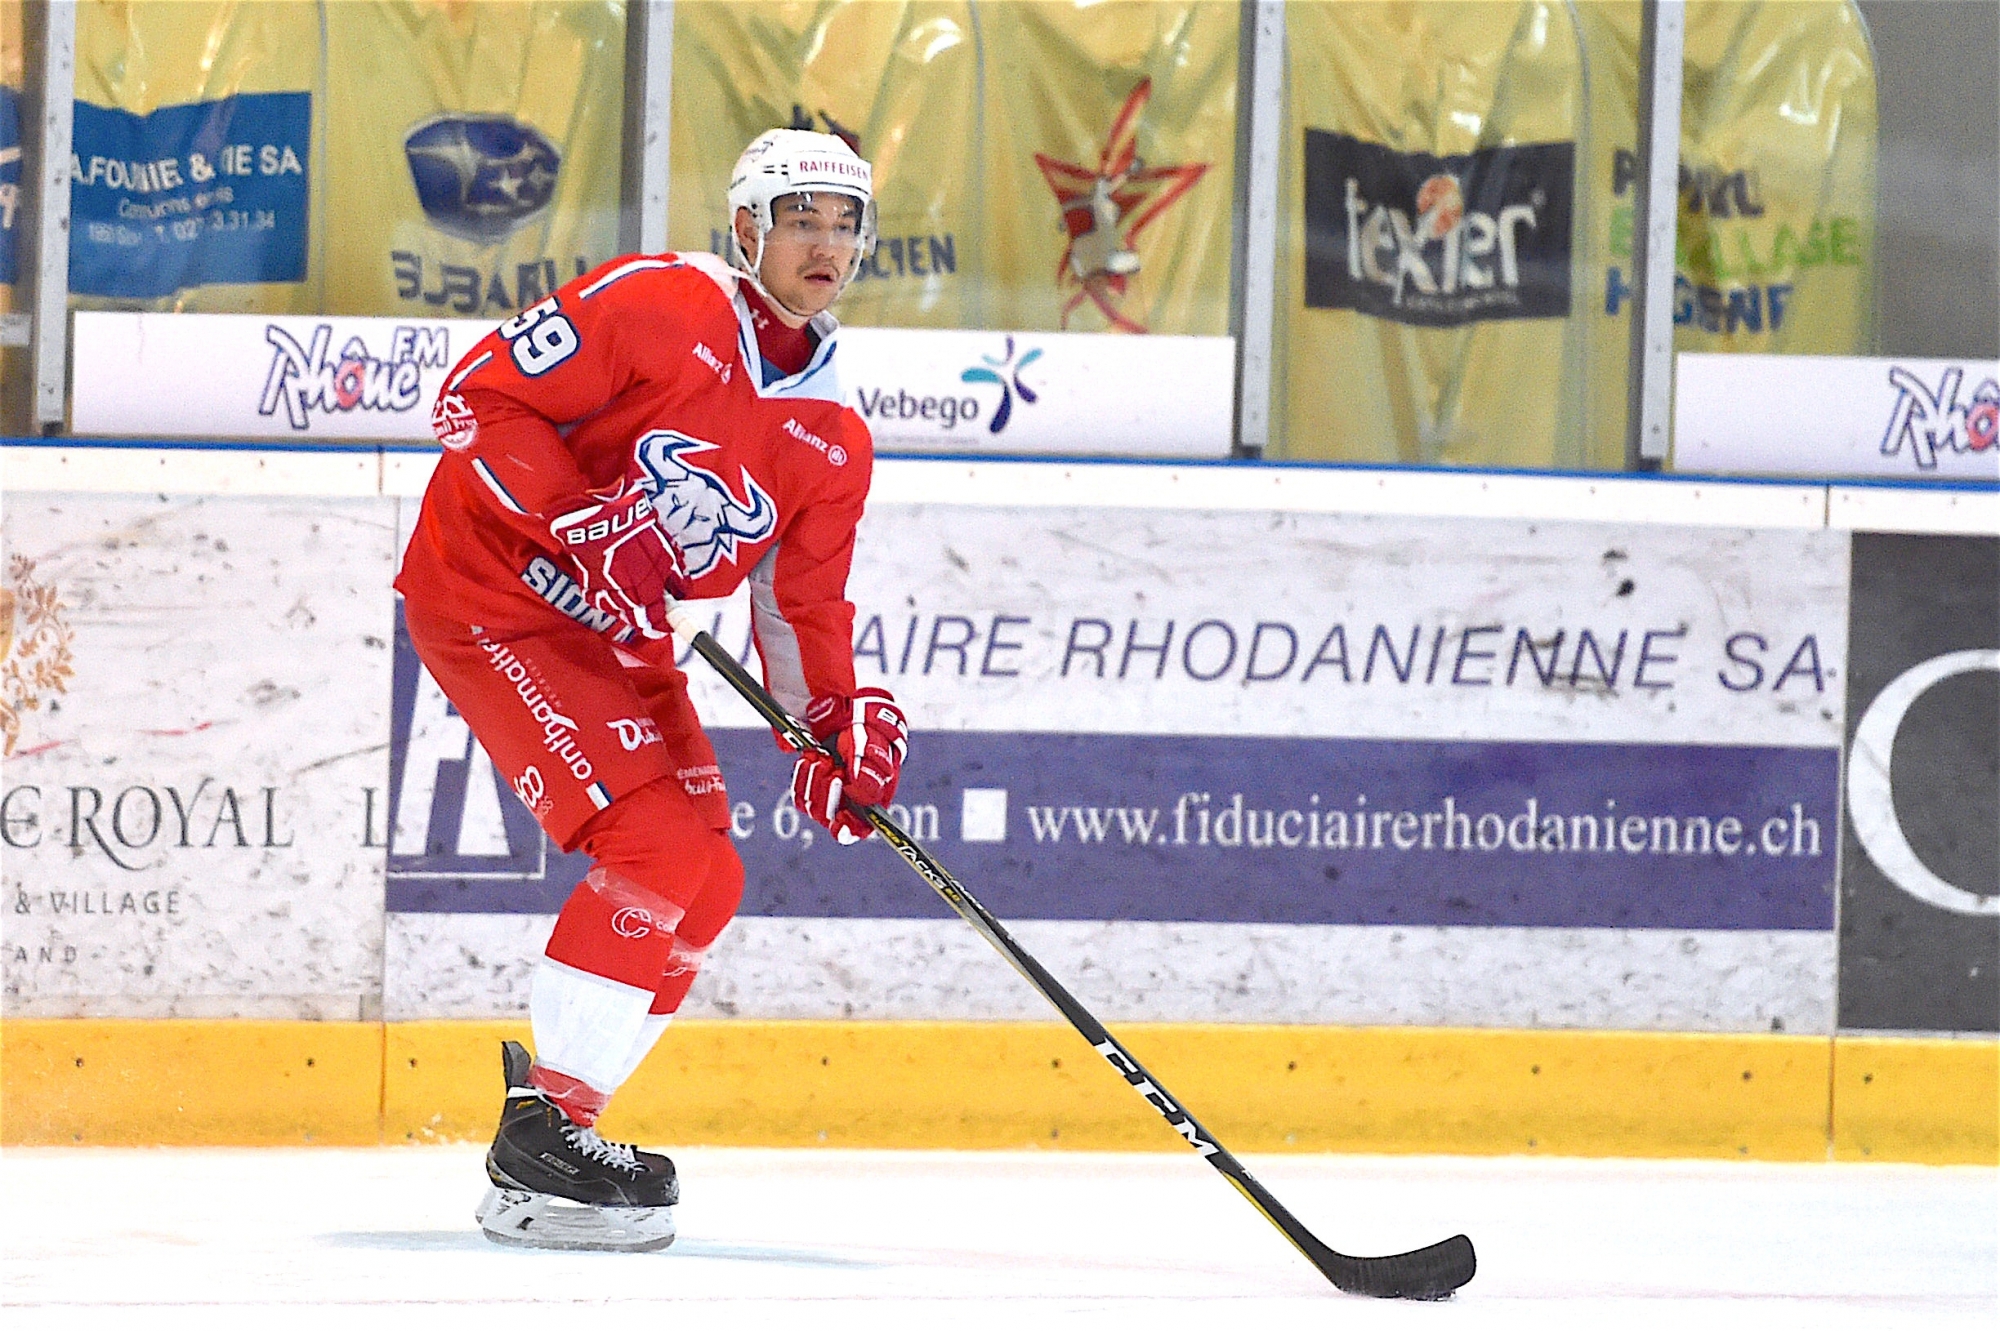 Sion, 29.11.2017, Swiss Ice Hockey MySports League, HC Sion-Nendaz 4 Vallees - Star Forward Morges, Mike Vermeille (HC Sion 59)  Swiss Ice Hockey MySports League 2017/2018